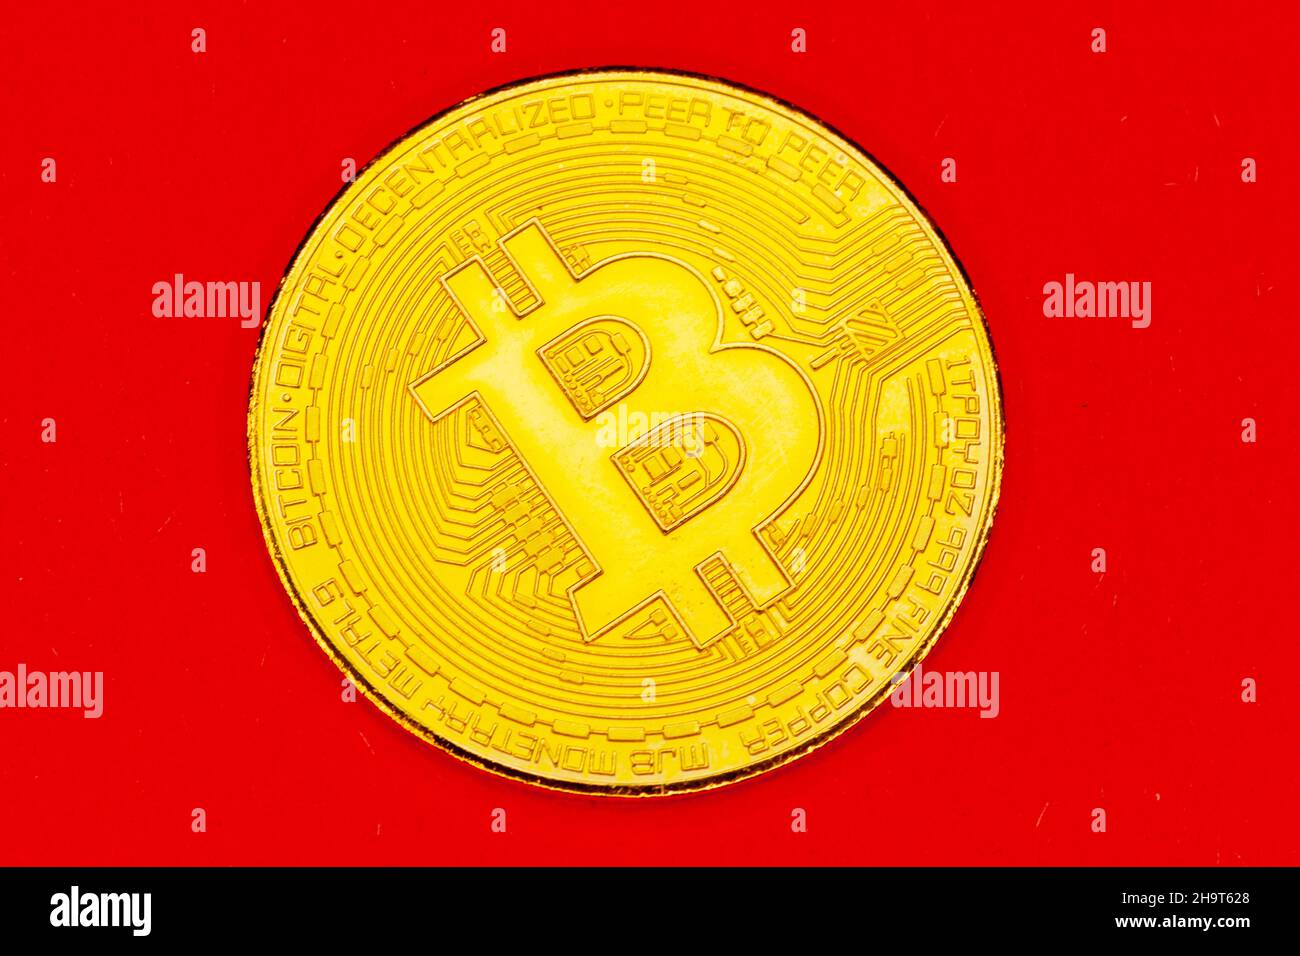 Bitcoin crytocurrencey coin. Stock Photo